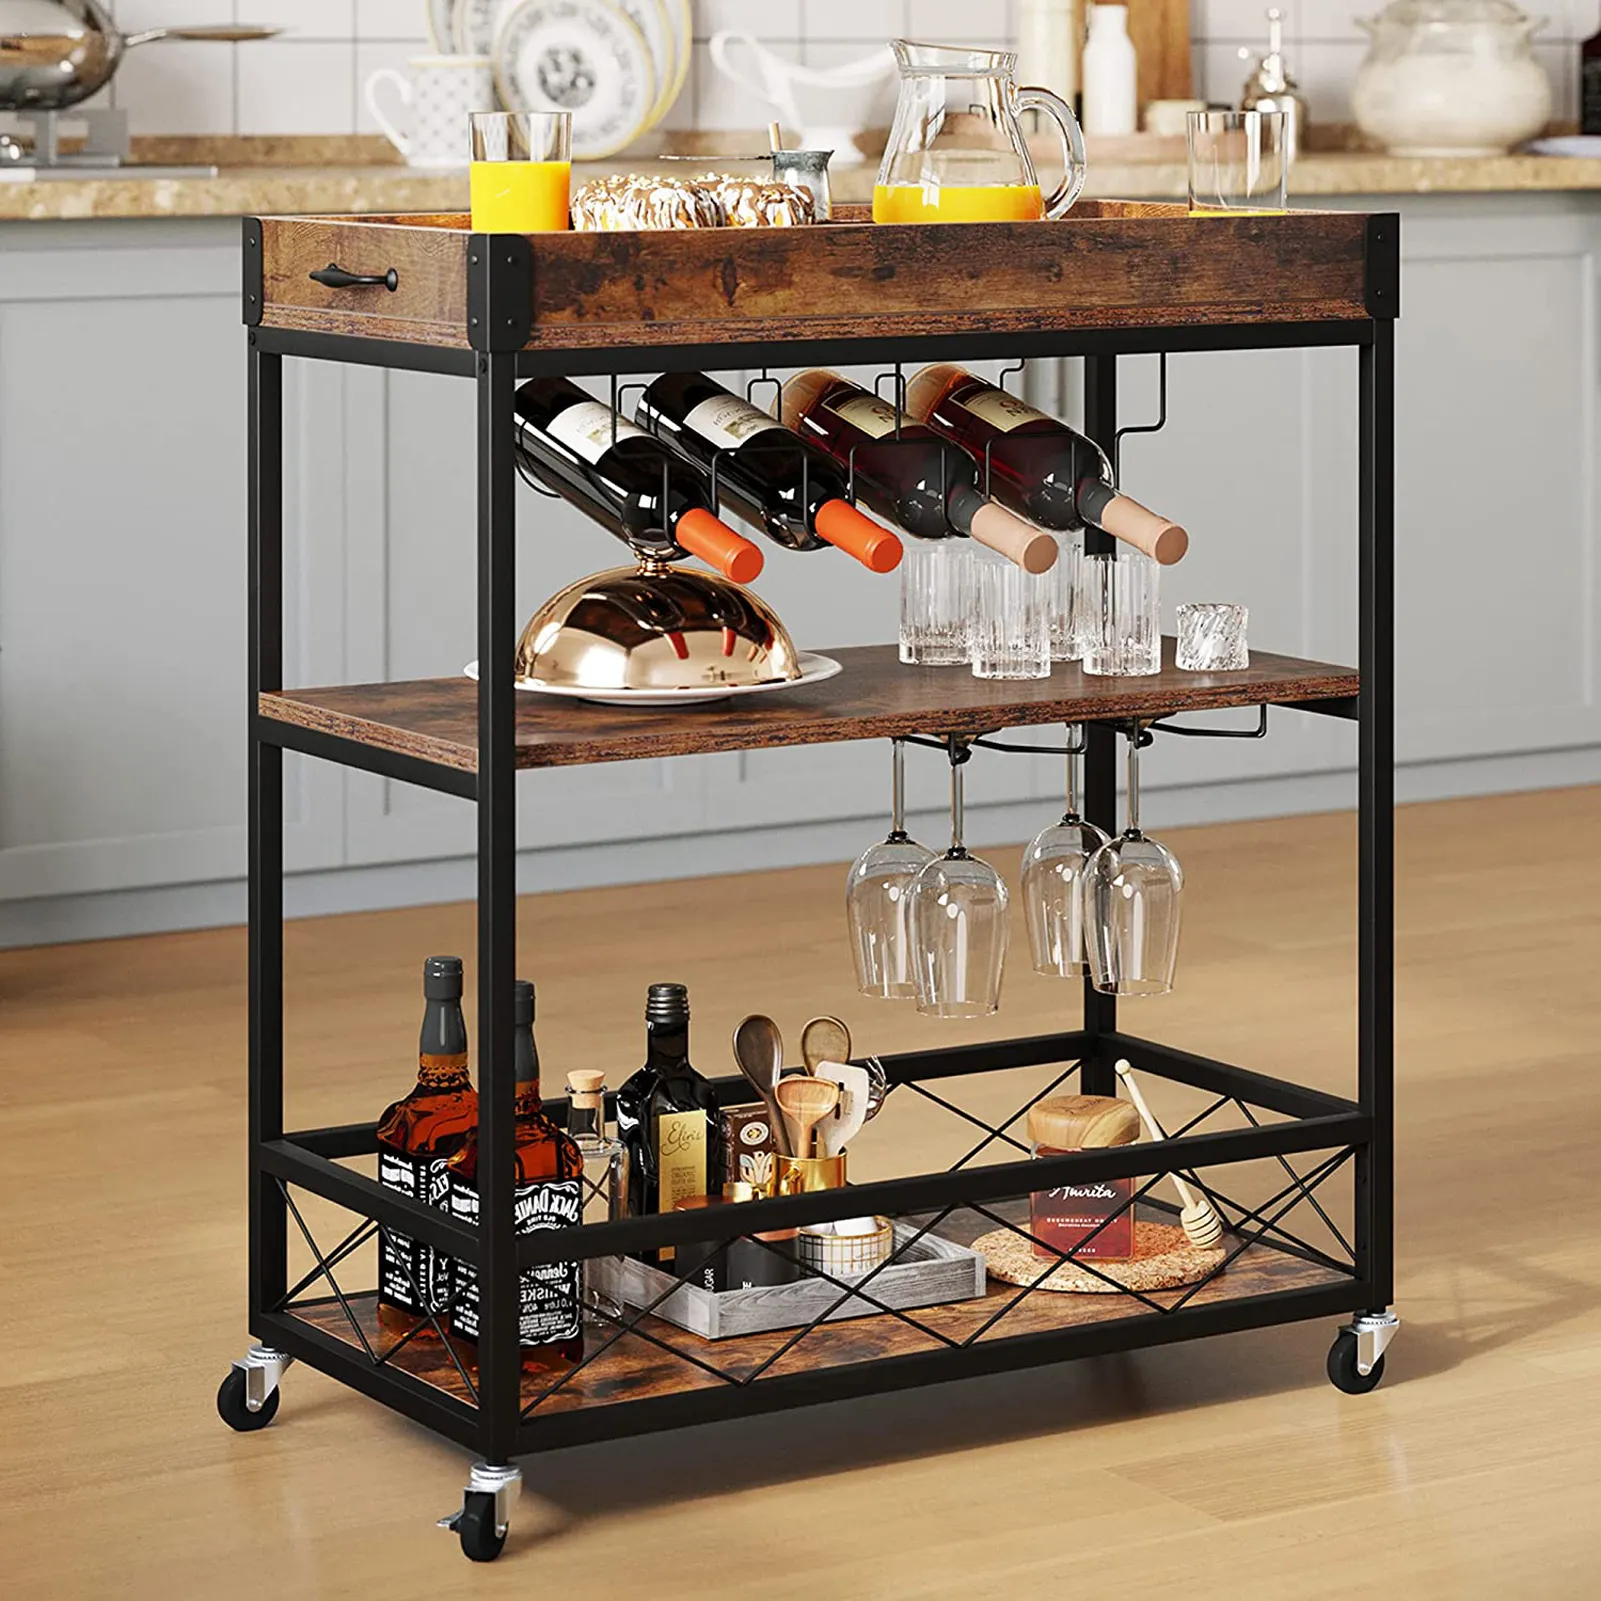 The Home Mobile Serving Cart on Wheels with Removable Wood Top Container 3-Tier Kitchen Cart with Wine Rack Glasses Holder